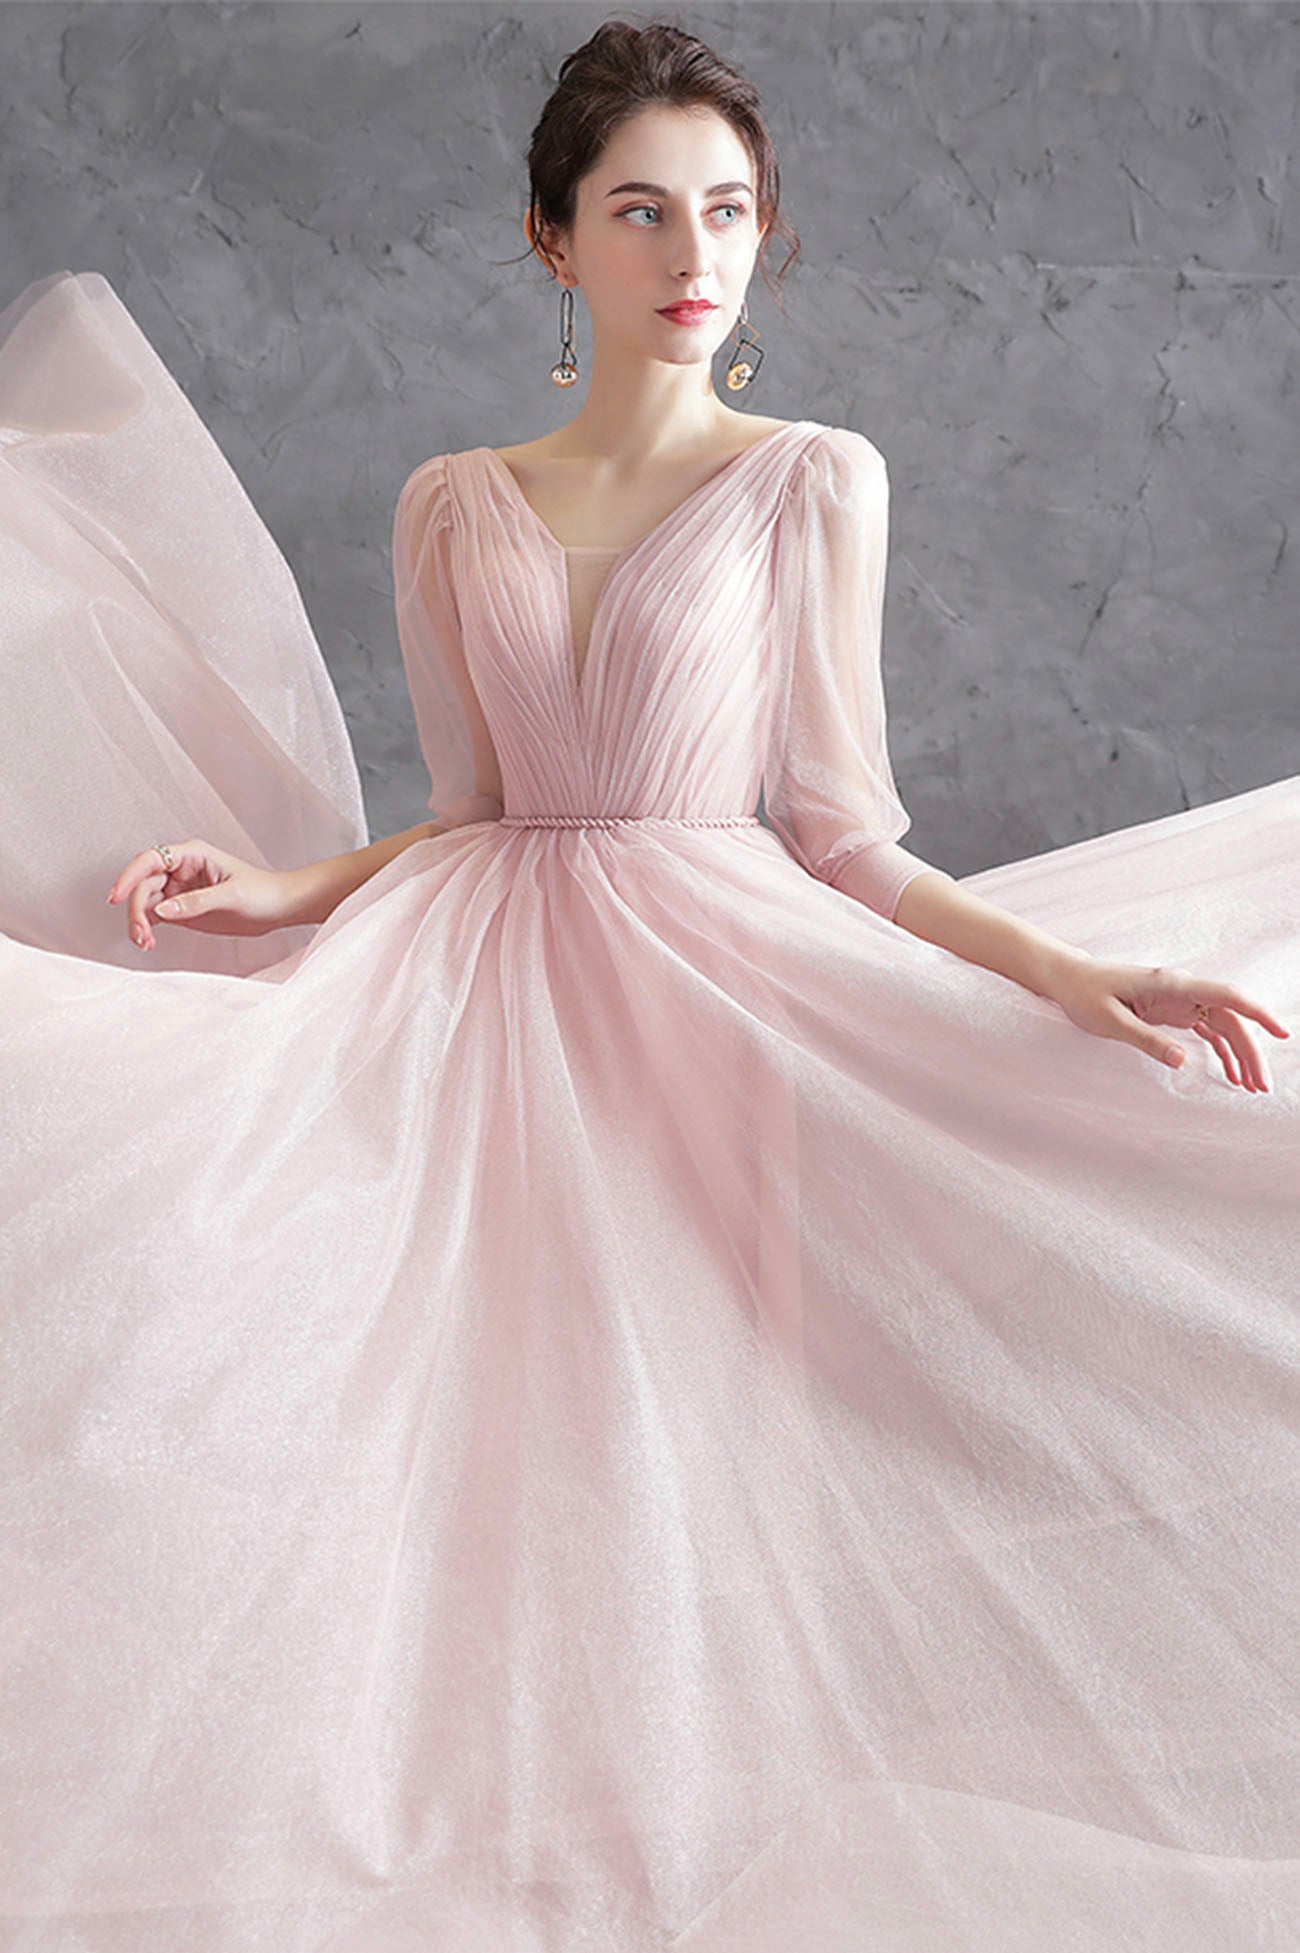 Pink V-Neck Tulle Long Prom Dress, Simple 1/2 Sleeve Evening Party Dress